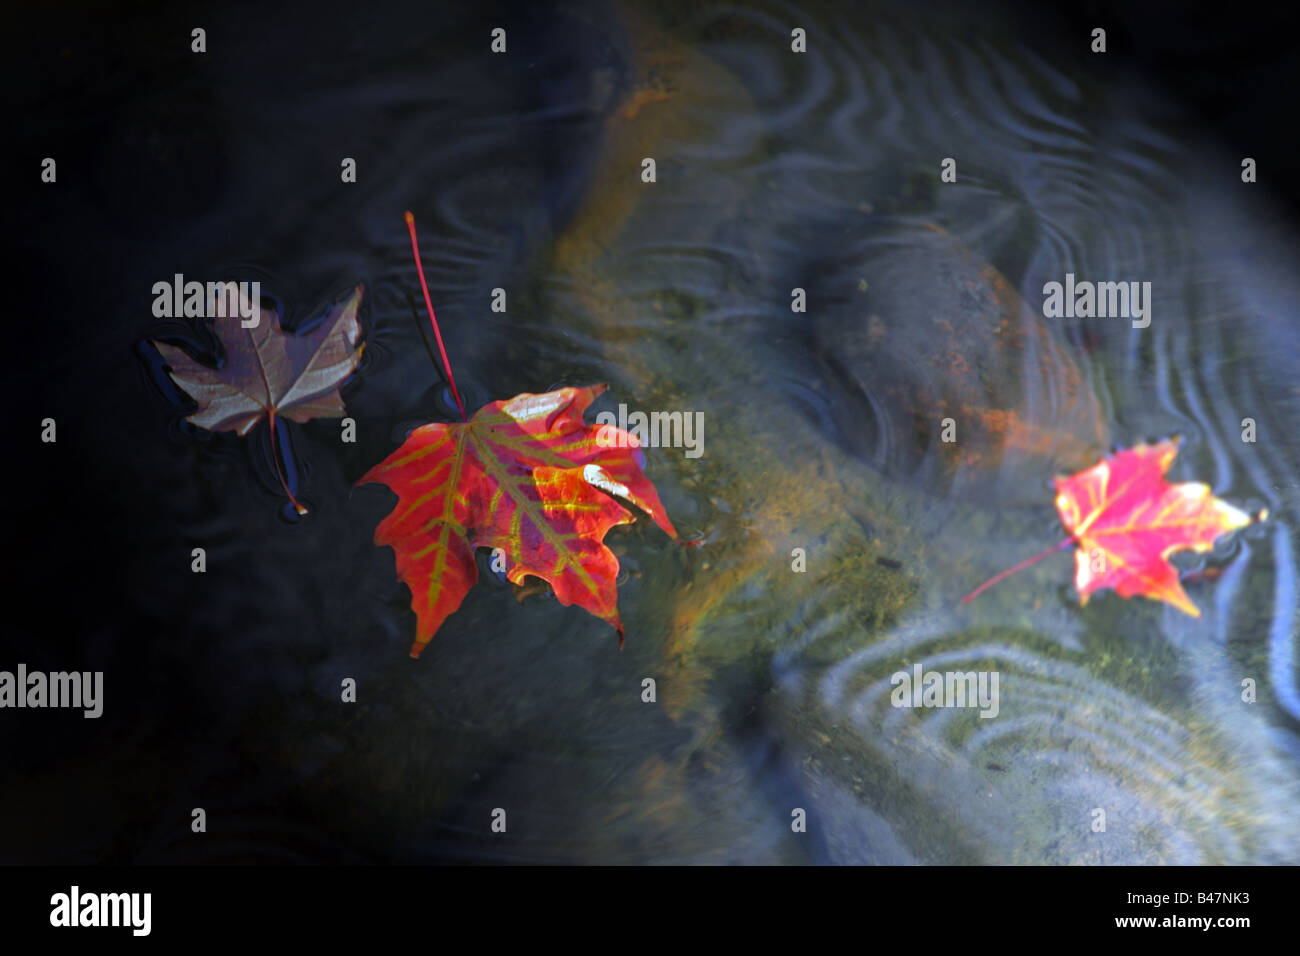 Fallen red sugar maple leaves floating on water Stock Photo